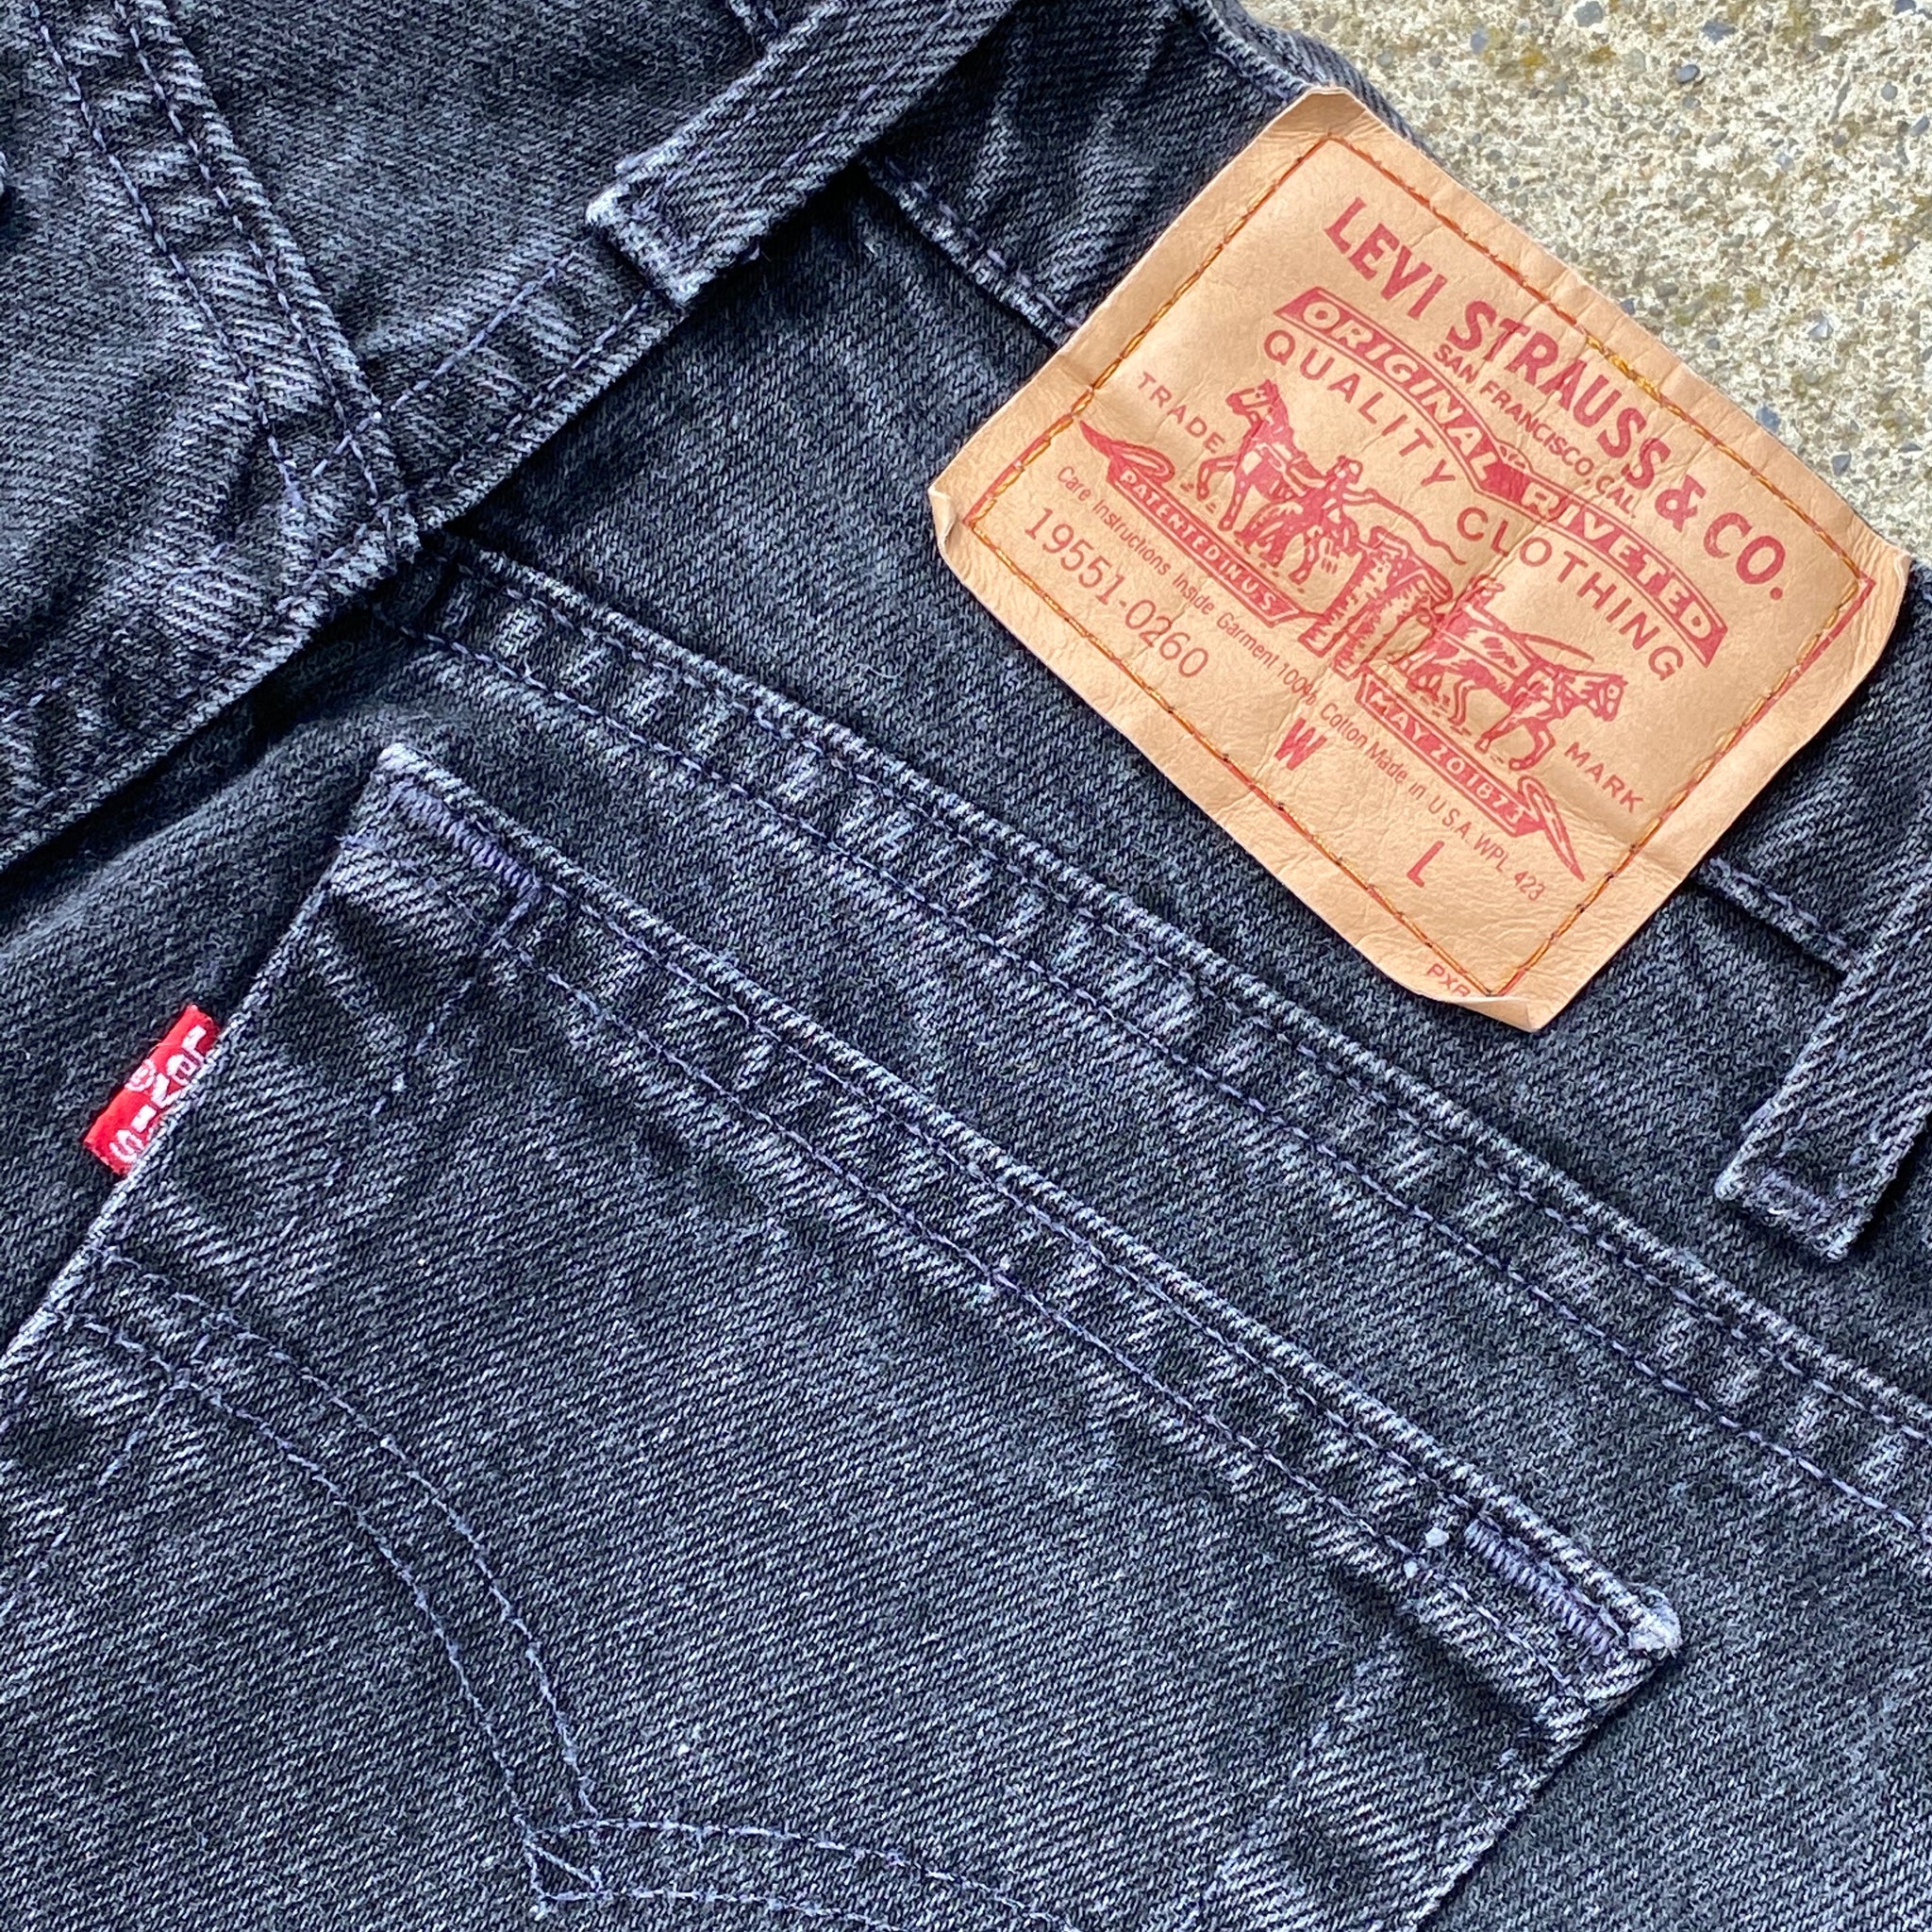 90s Women’s levi’s. Made in usa🇺🇸 sz 10